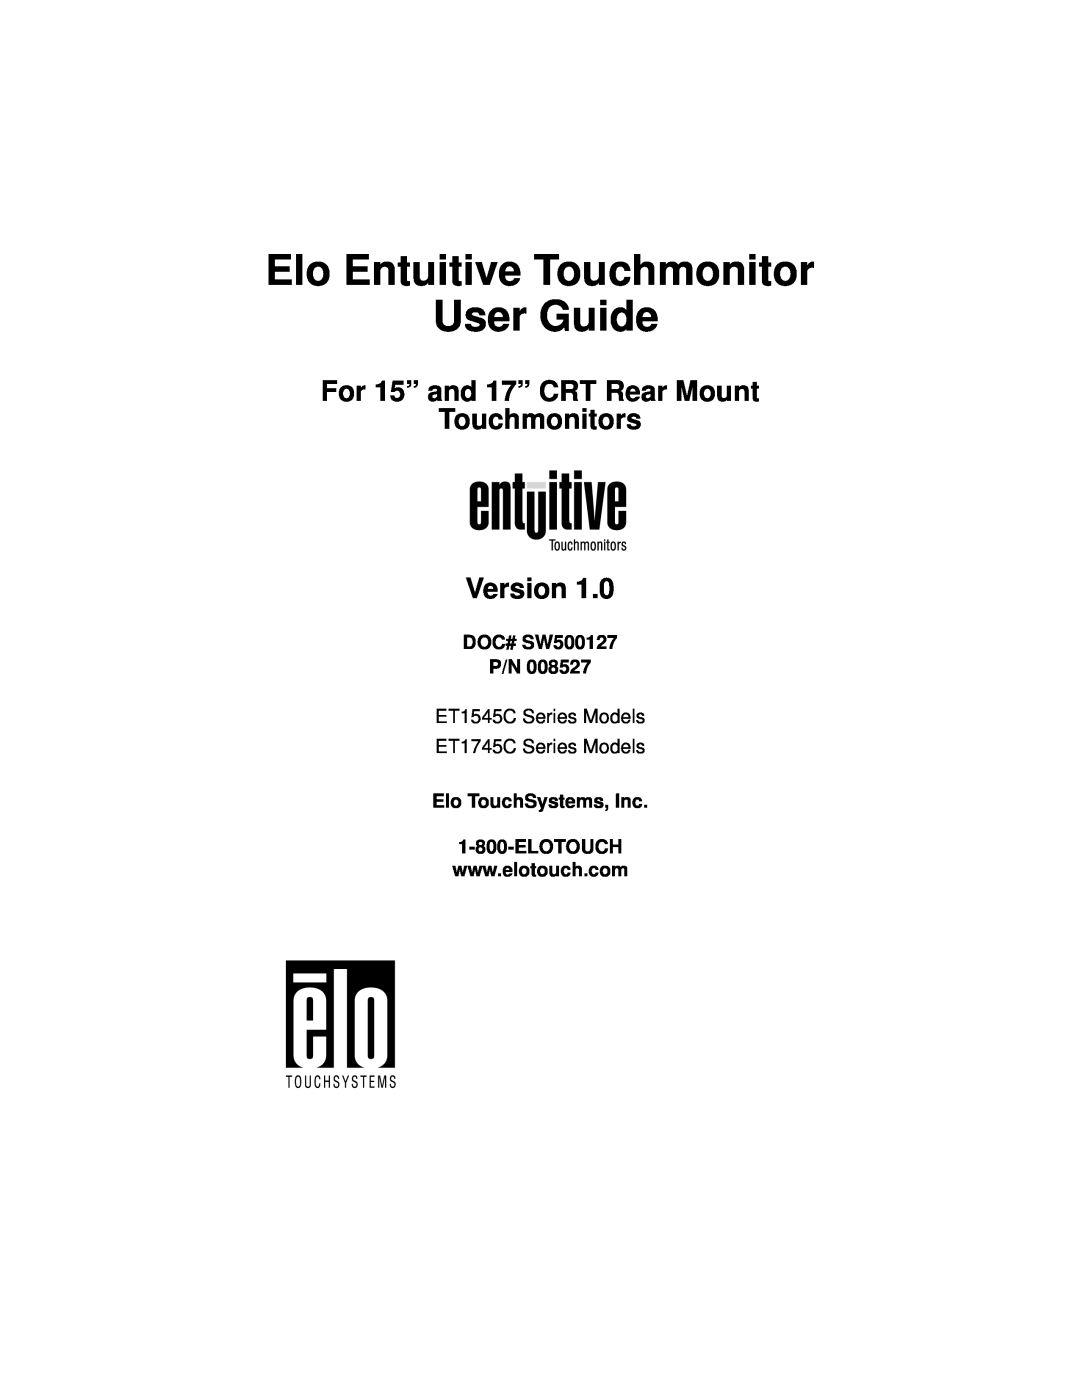 Elo TouchSystems ET1545C, ET1745C manual Elo Entuitive Touchmonitor User Guide, DOC# SW500127 P/N, Elo TouchSystems, Inc 